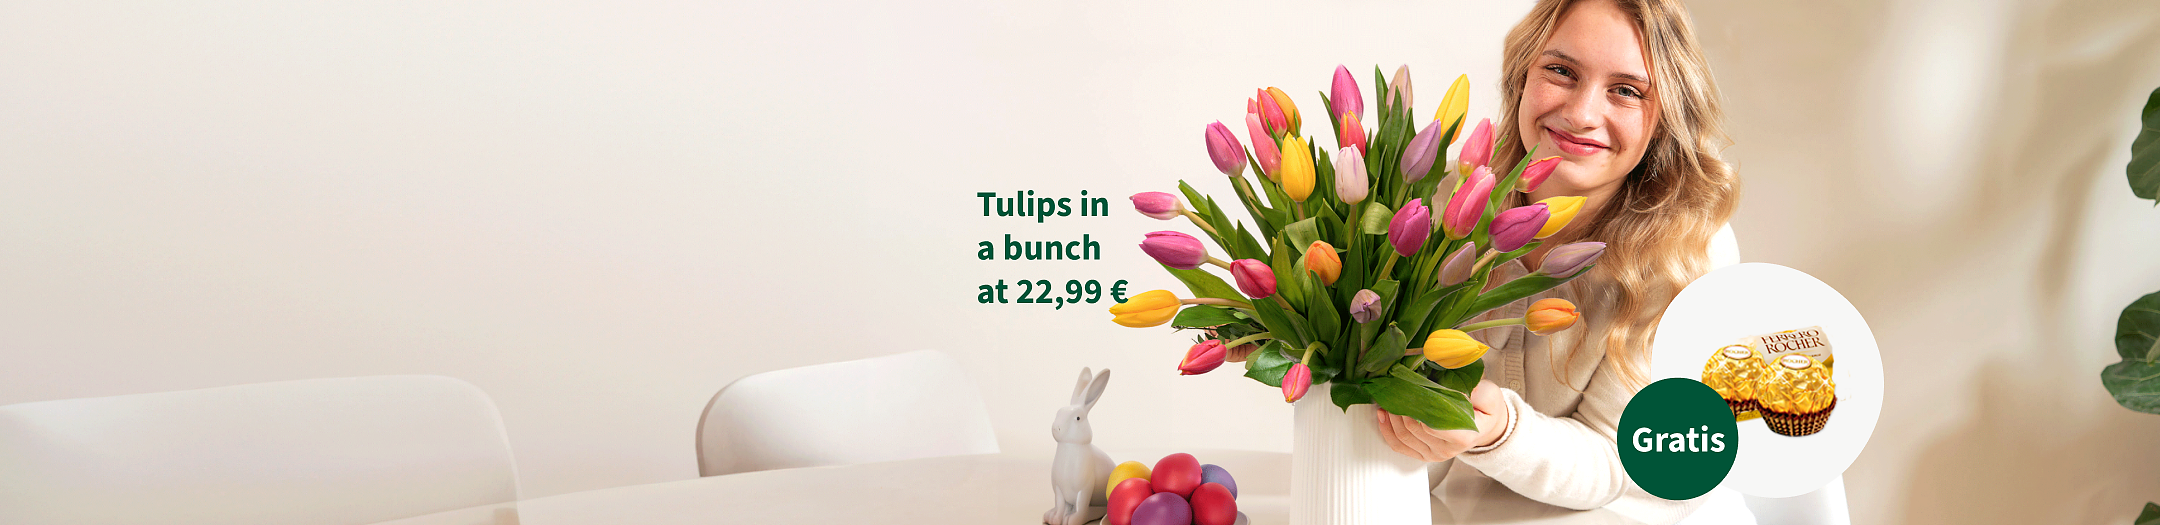 Tulips in a bunch at € 22.99